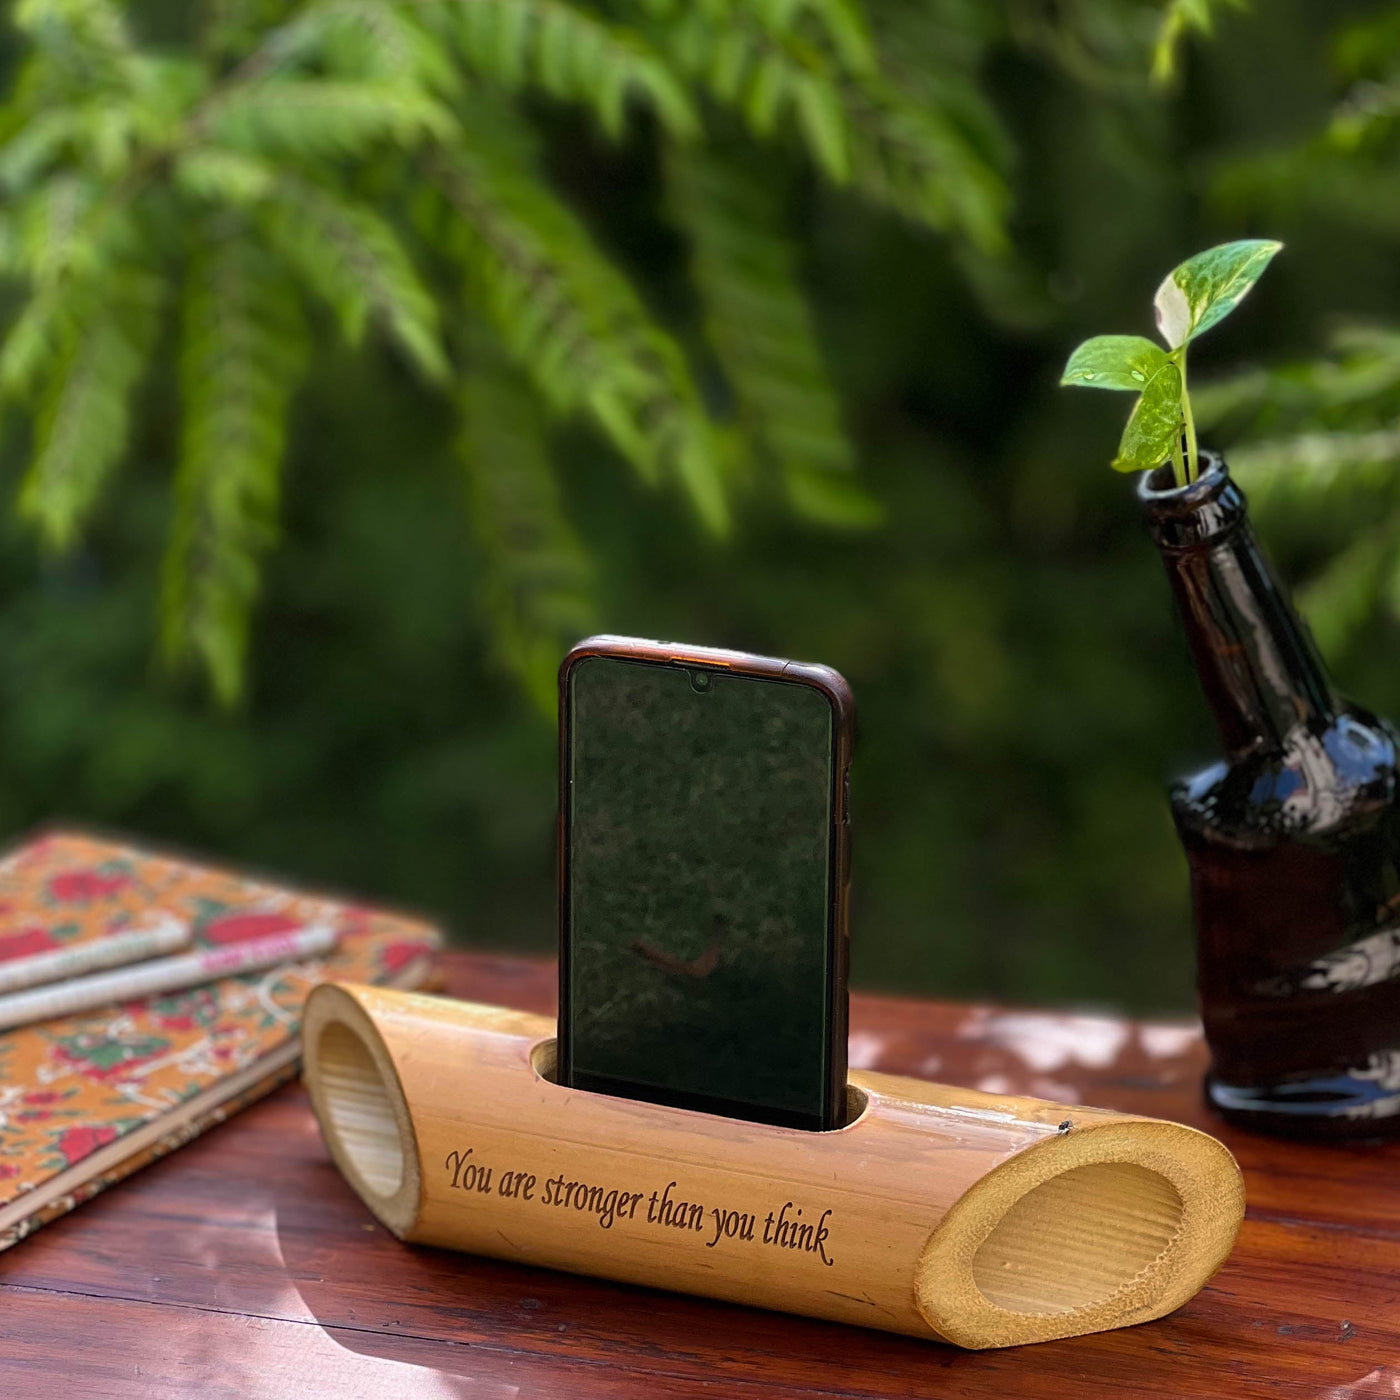 Bamboobeat sound amplifier | You are stronger than you think | Mobile Holder | Office Desk | Scrapshala - Suspire